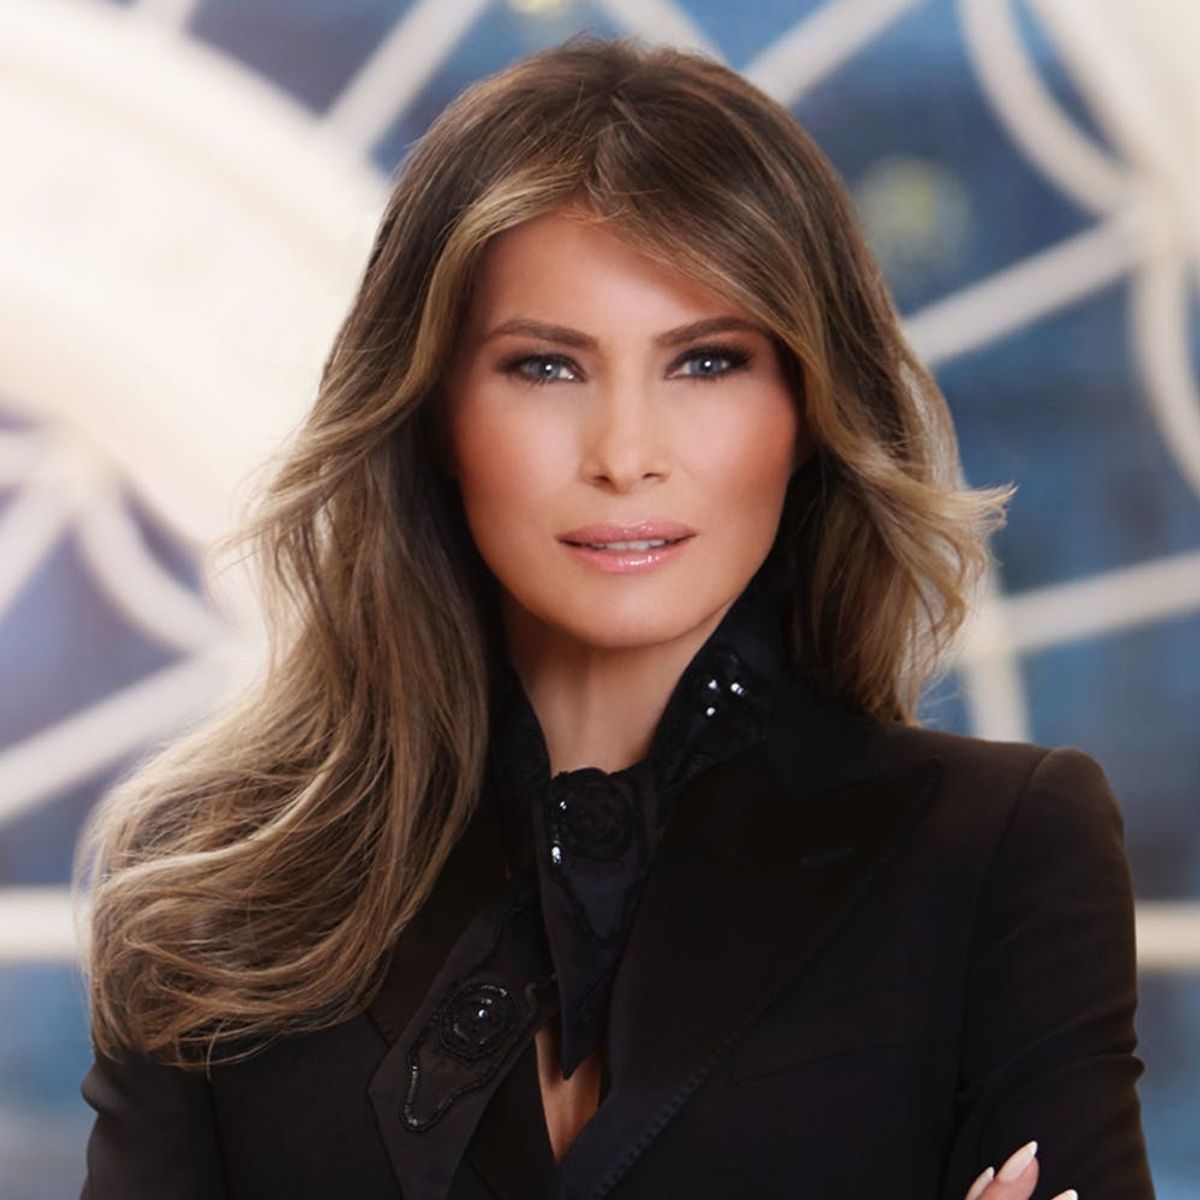 It’s Time to Give Melania Trump a Break